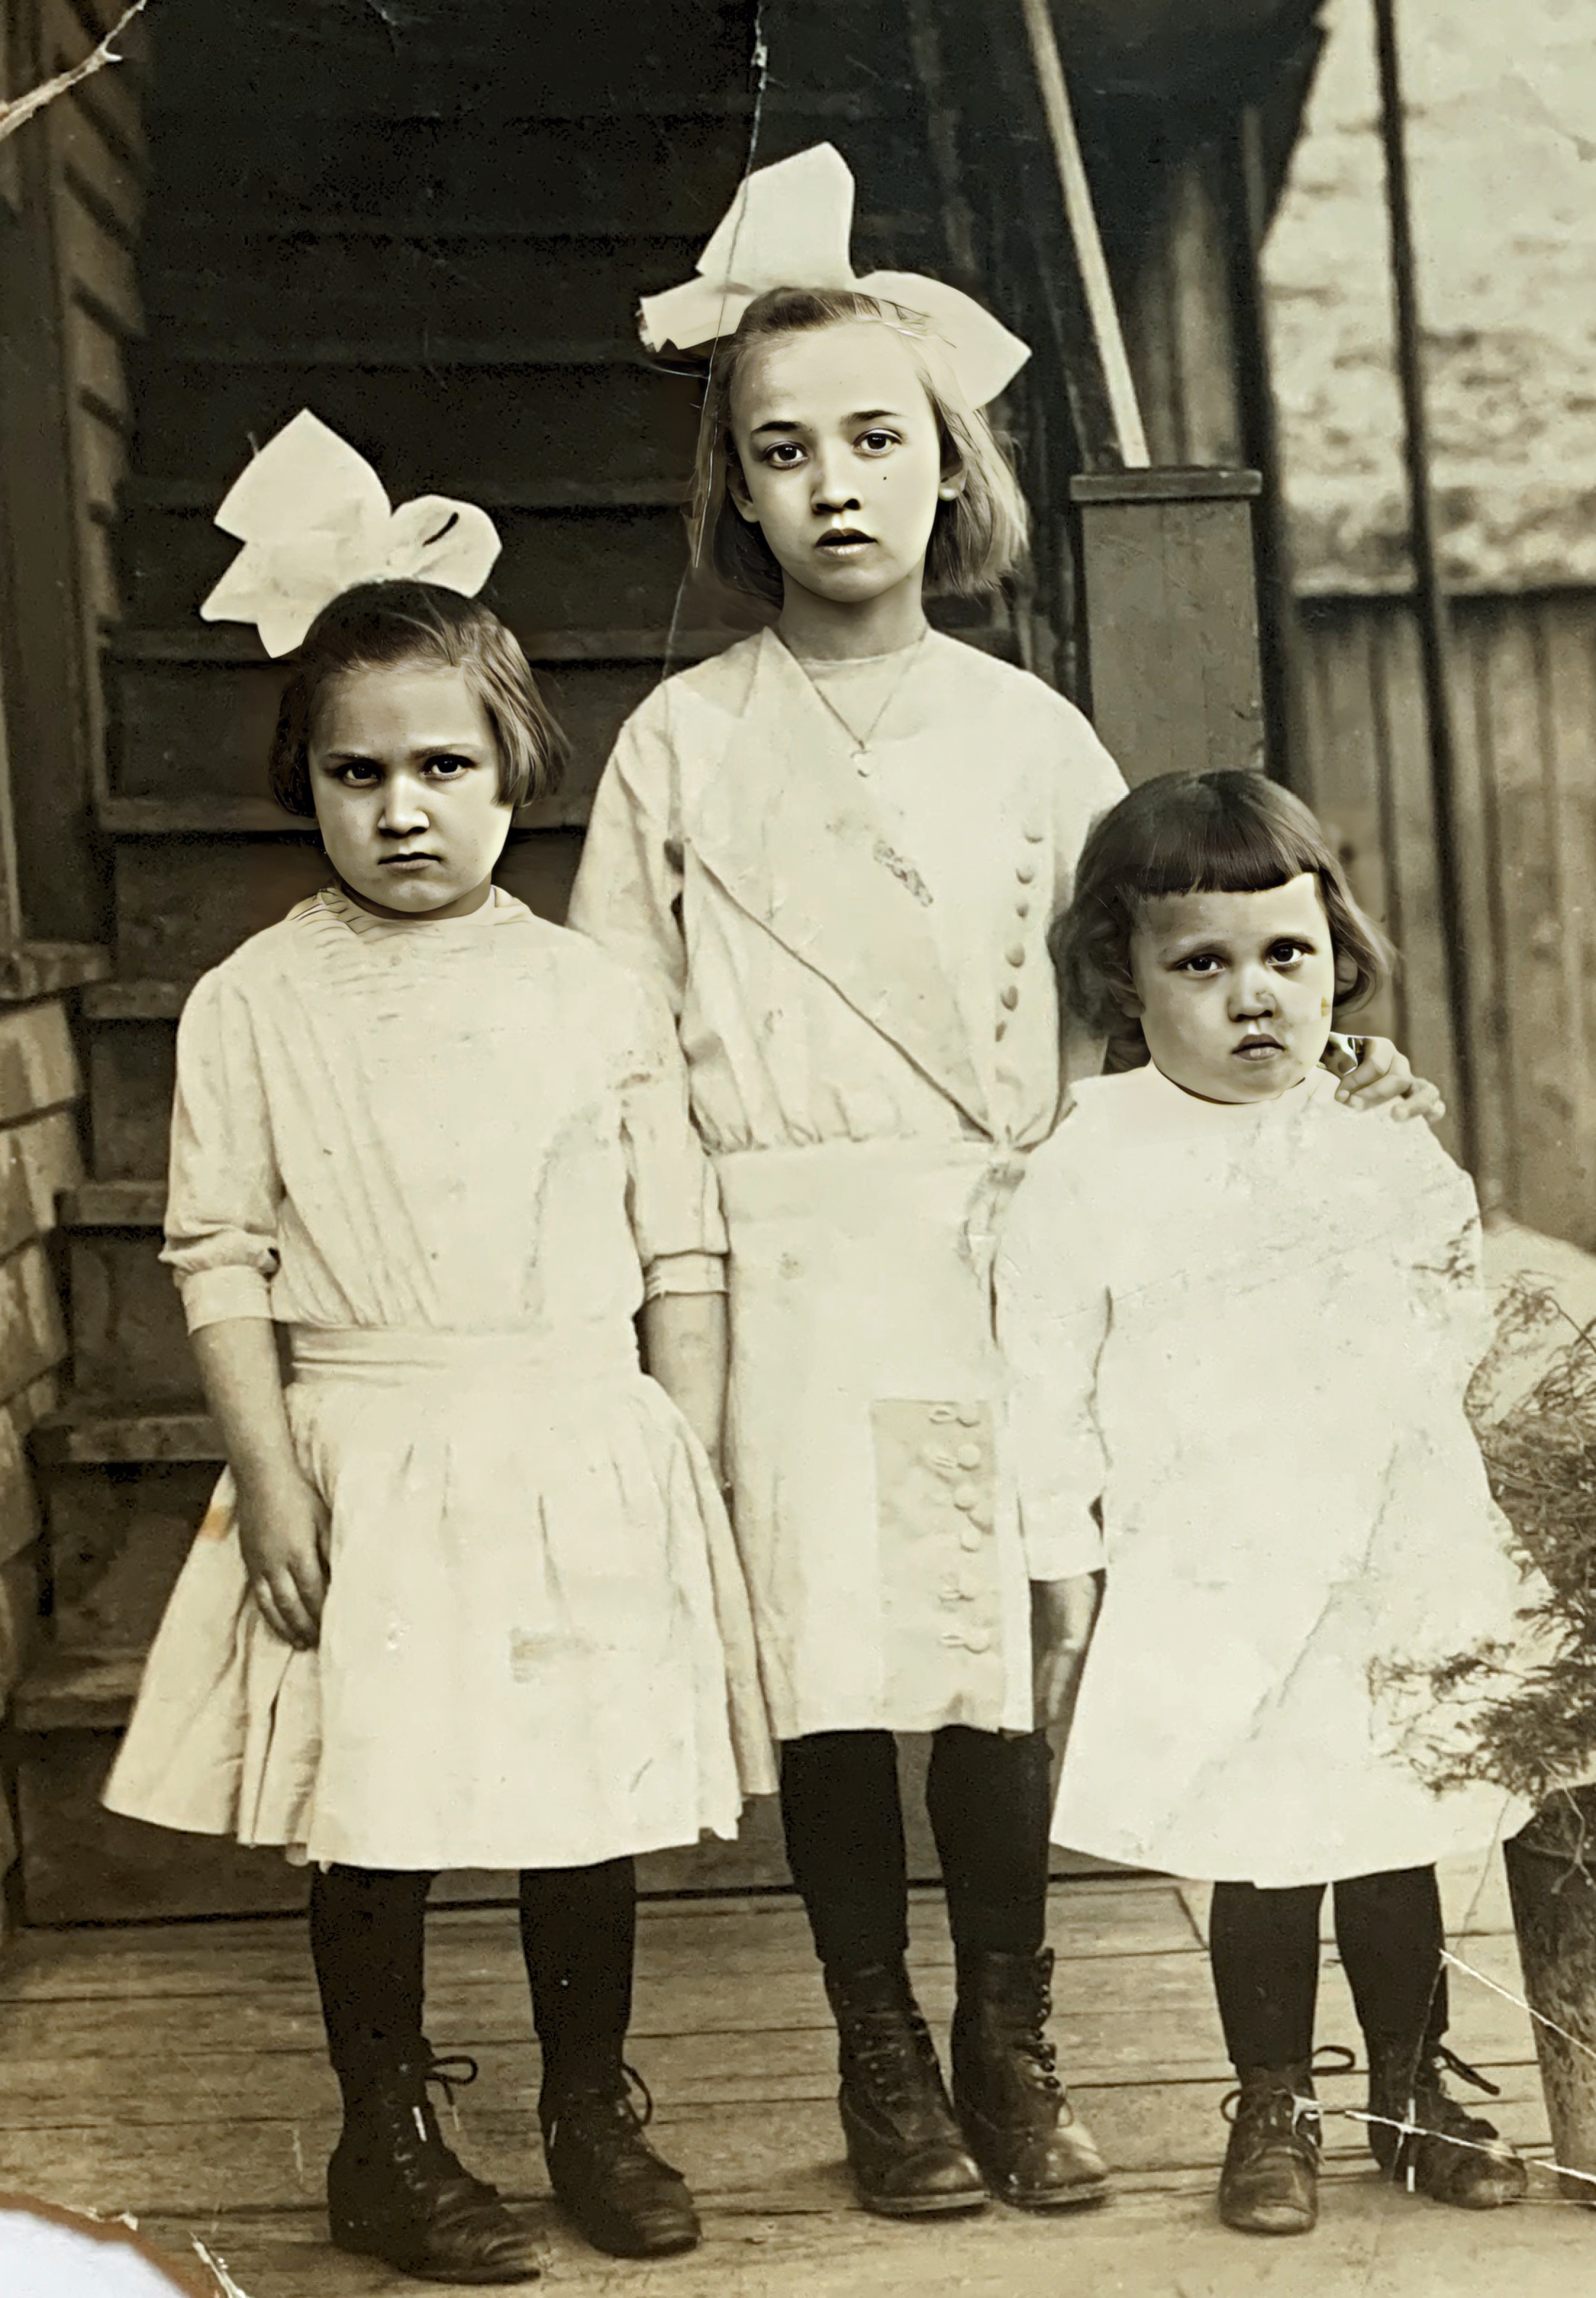 Photot submitted by Valerie Crist.  Erwin sisters.  Celia, Nellie, Mary.  Taken in Newberne West Virginia 1912